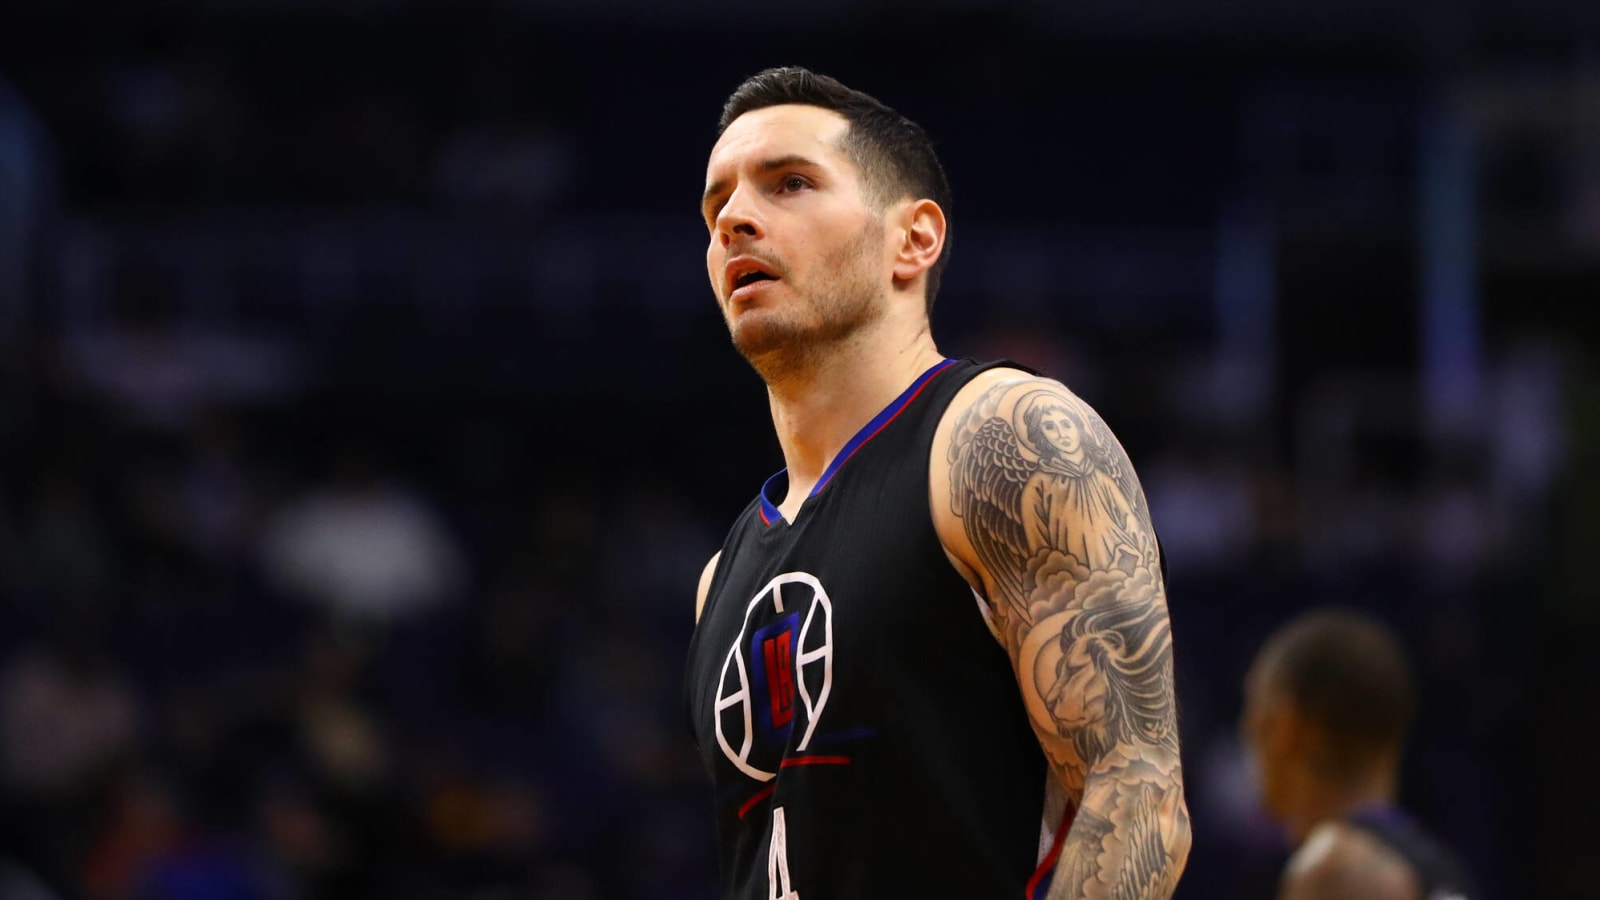 Report: JJ Redick Early Favorite To Land Lakers Coaching Job, Sam Cassell Is Legitimate Candidate To Watch